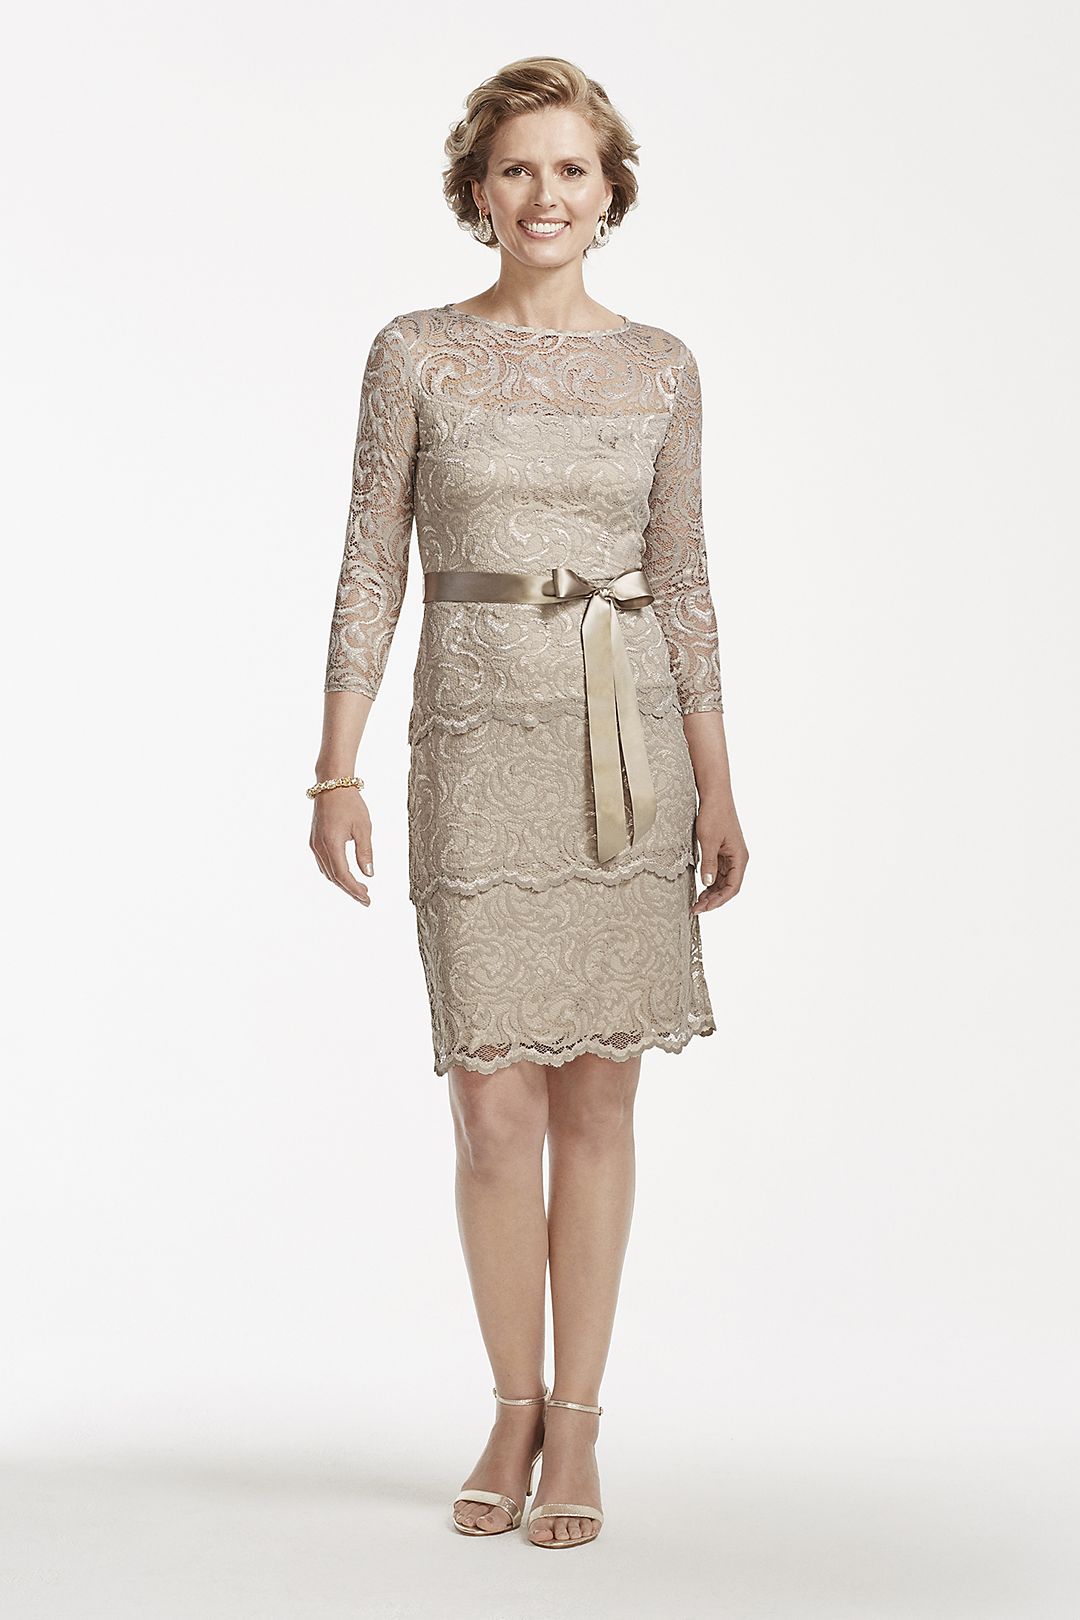 Short 3/4 Sleeve Tiered Floral Lace Dress Image 1